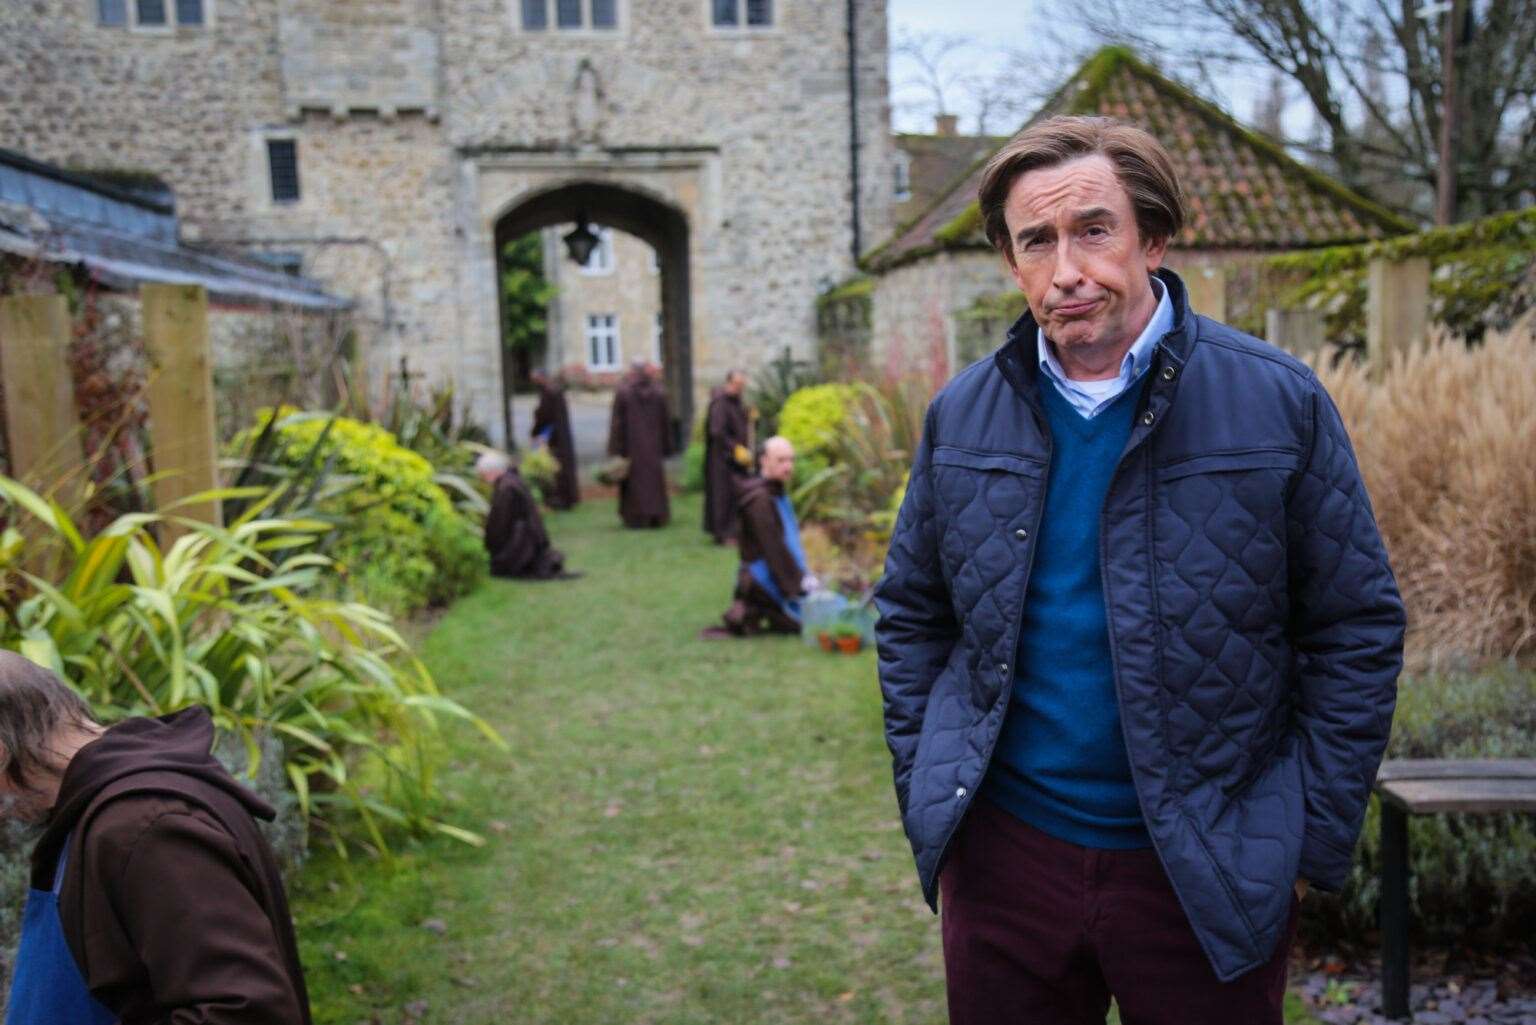 Alan Partridge visiting an historic Kent location. Picture: Baby Cow